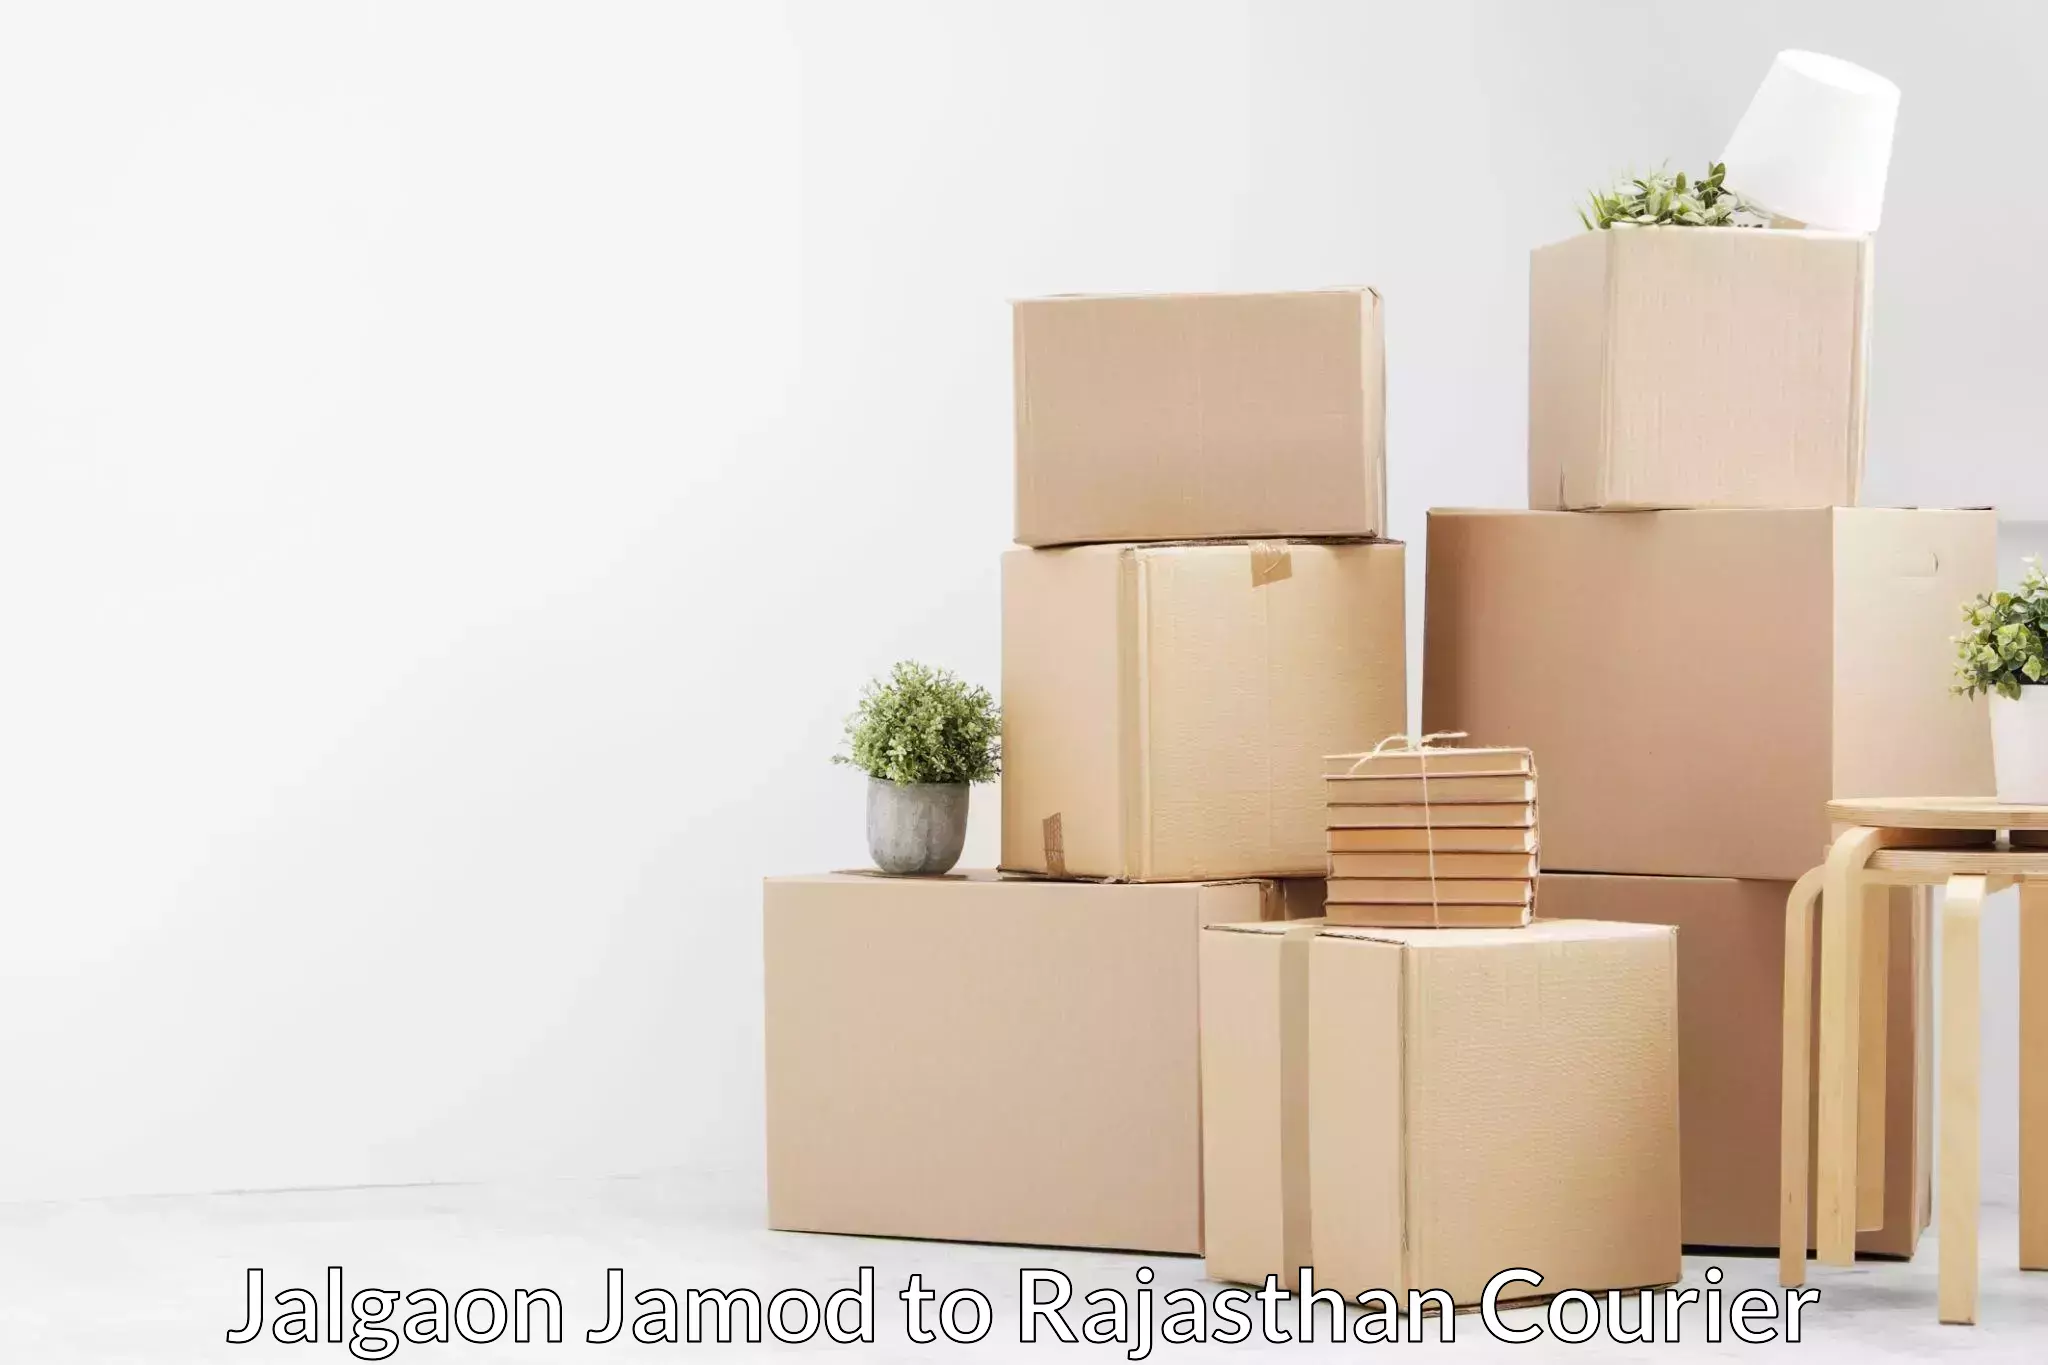 Long-distance moving services Jalgaon Jamod to Suratgarh